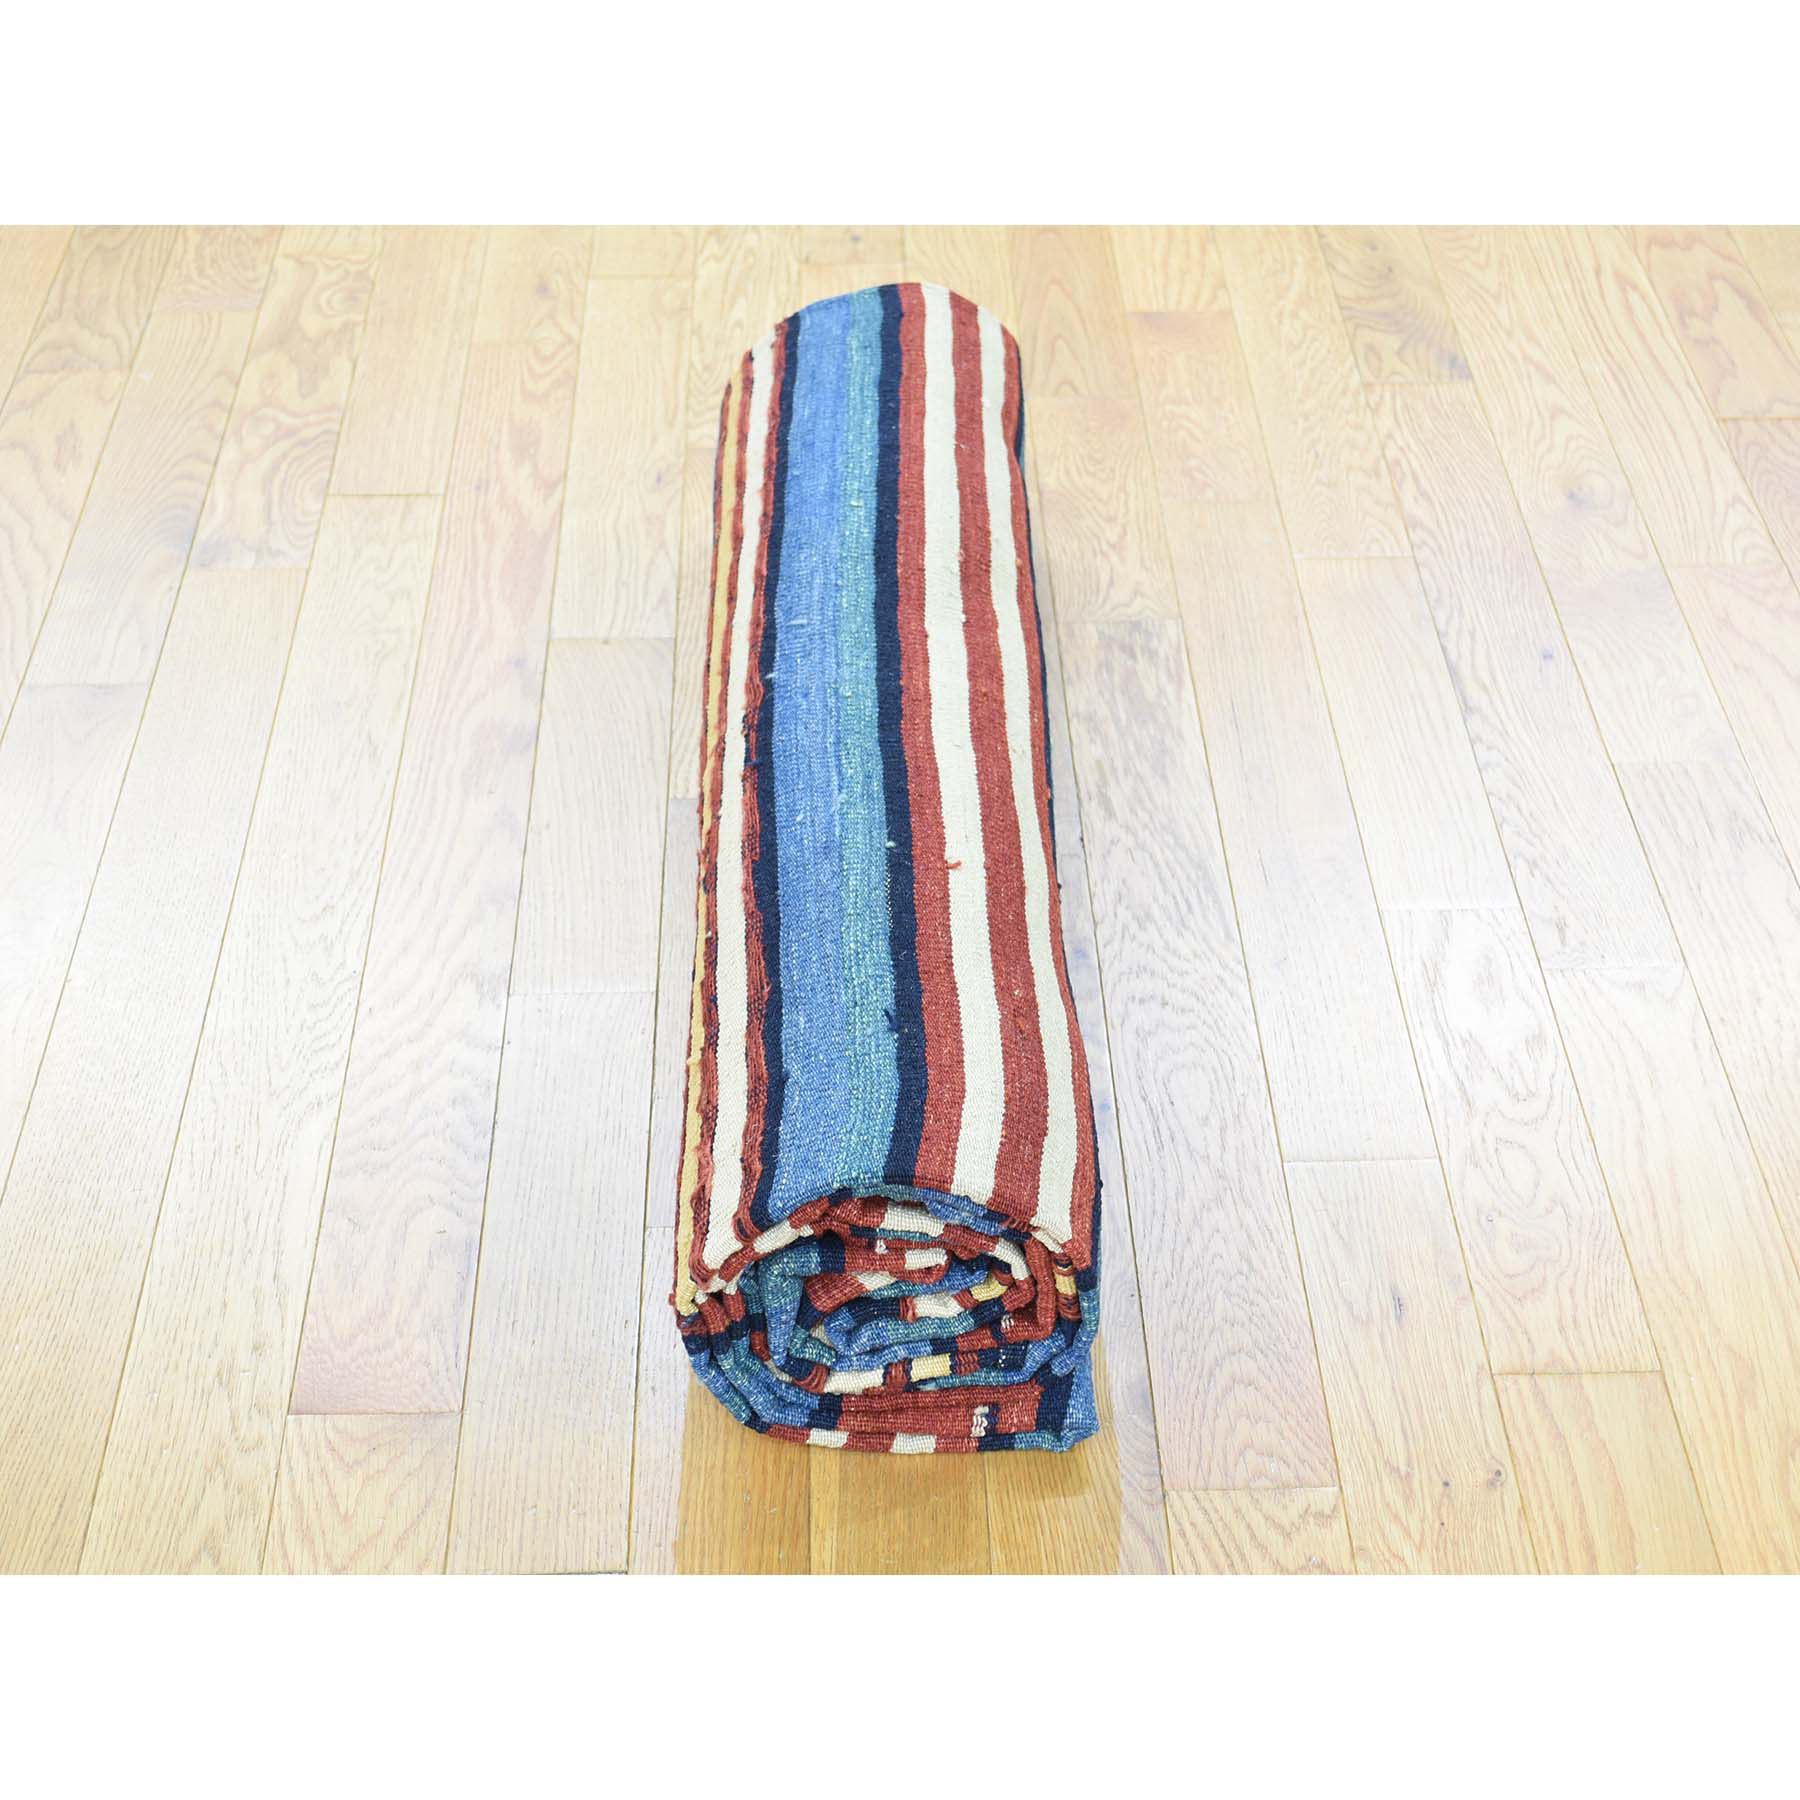 8-7 x10-3  Hand-Woven Durie Kilim Flat Weave Pure Wool Striped Rug 